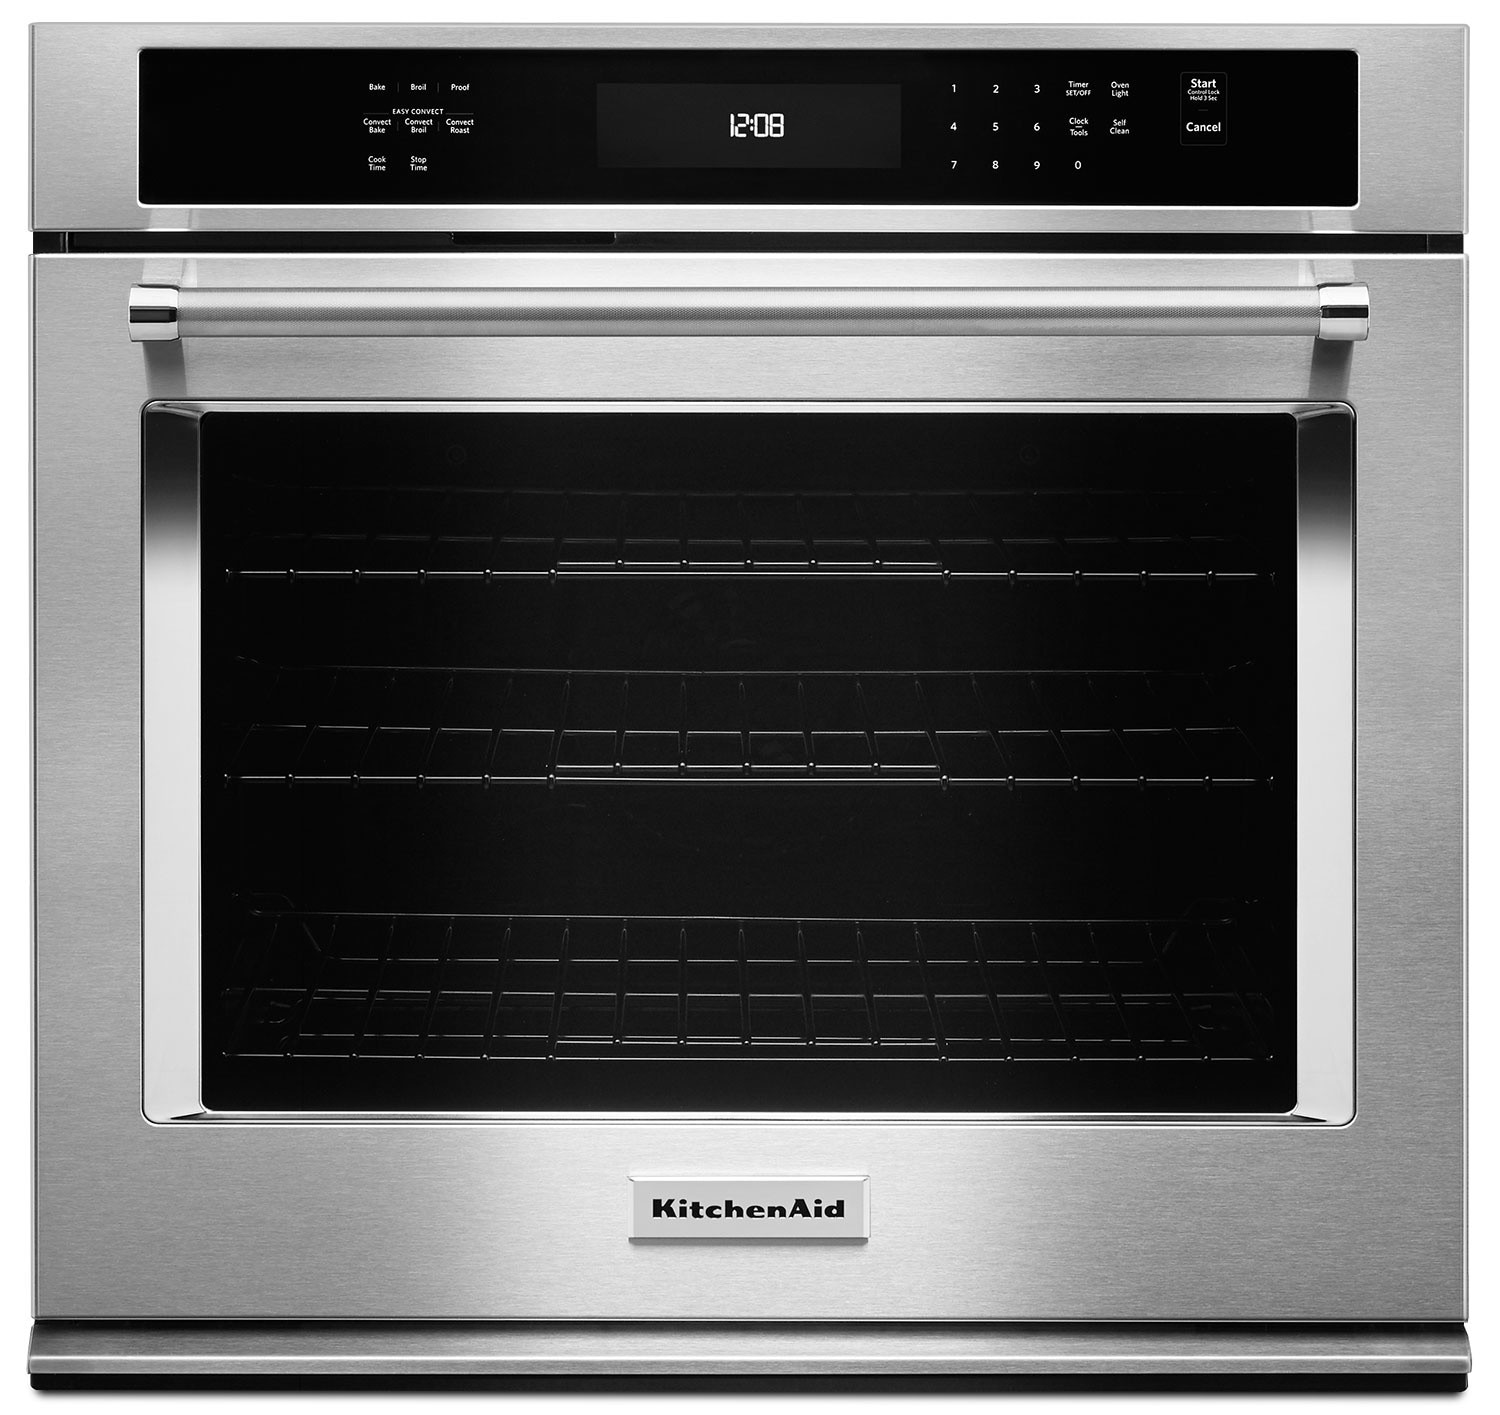 Kitchen Aid Wall Oven
 KitchenAid 5 0 Cu Ft Single Wall Oven with Even Heat